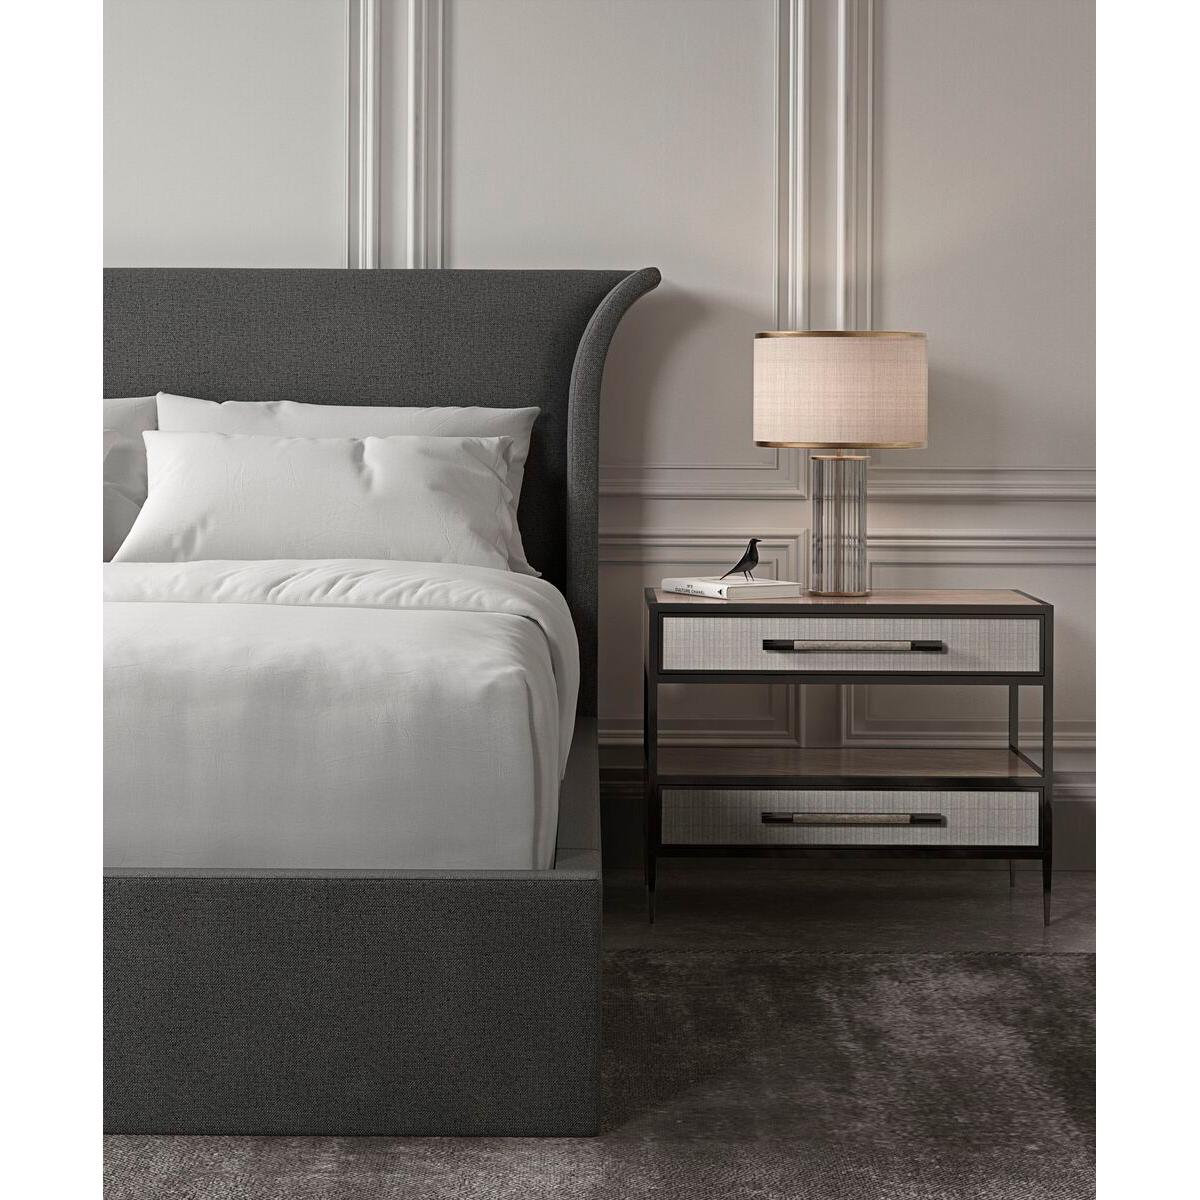 An elegant US queen-sized upholstered bed frame featuring a high headboard that is flared out and curves gently at the sides. The frame is wrapped in a dark grey fabric with a subtle textured finish, which suggests a contemporary design that could